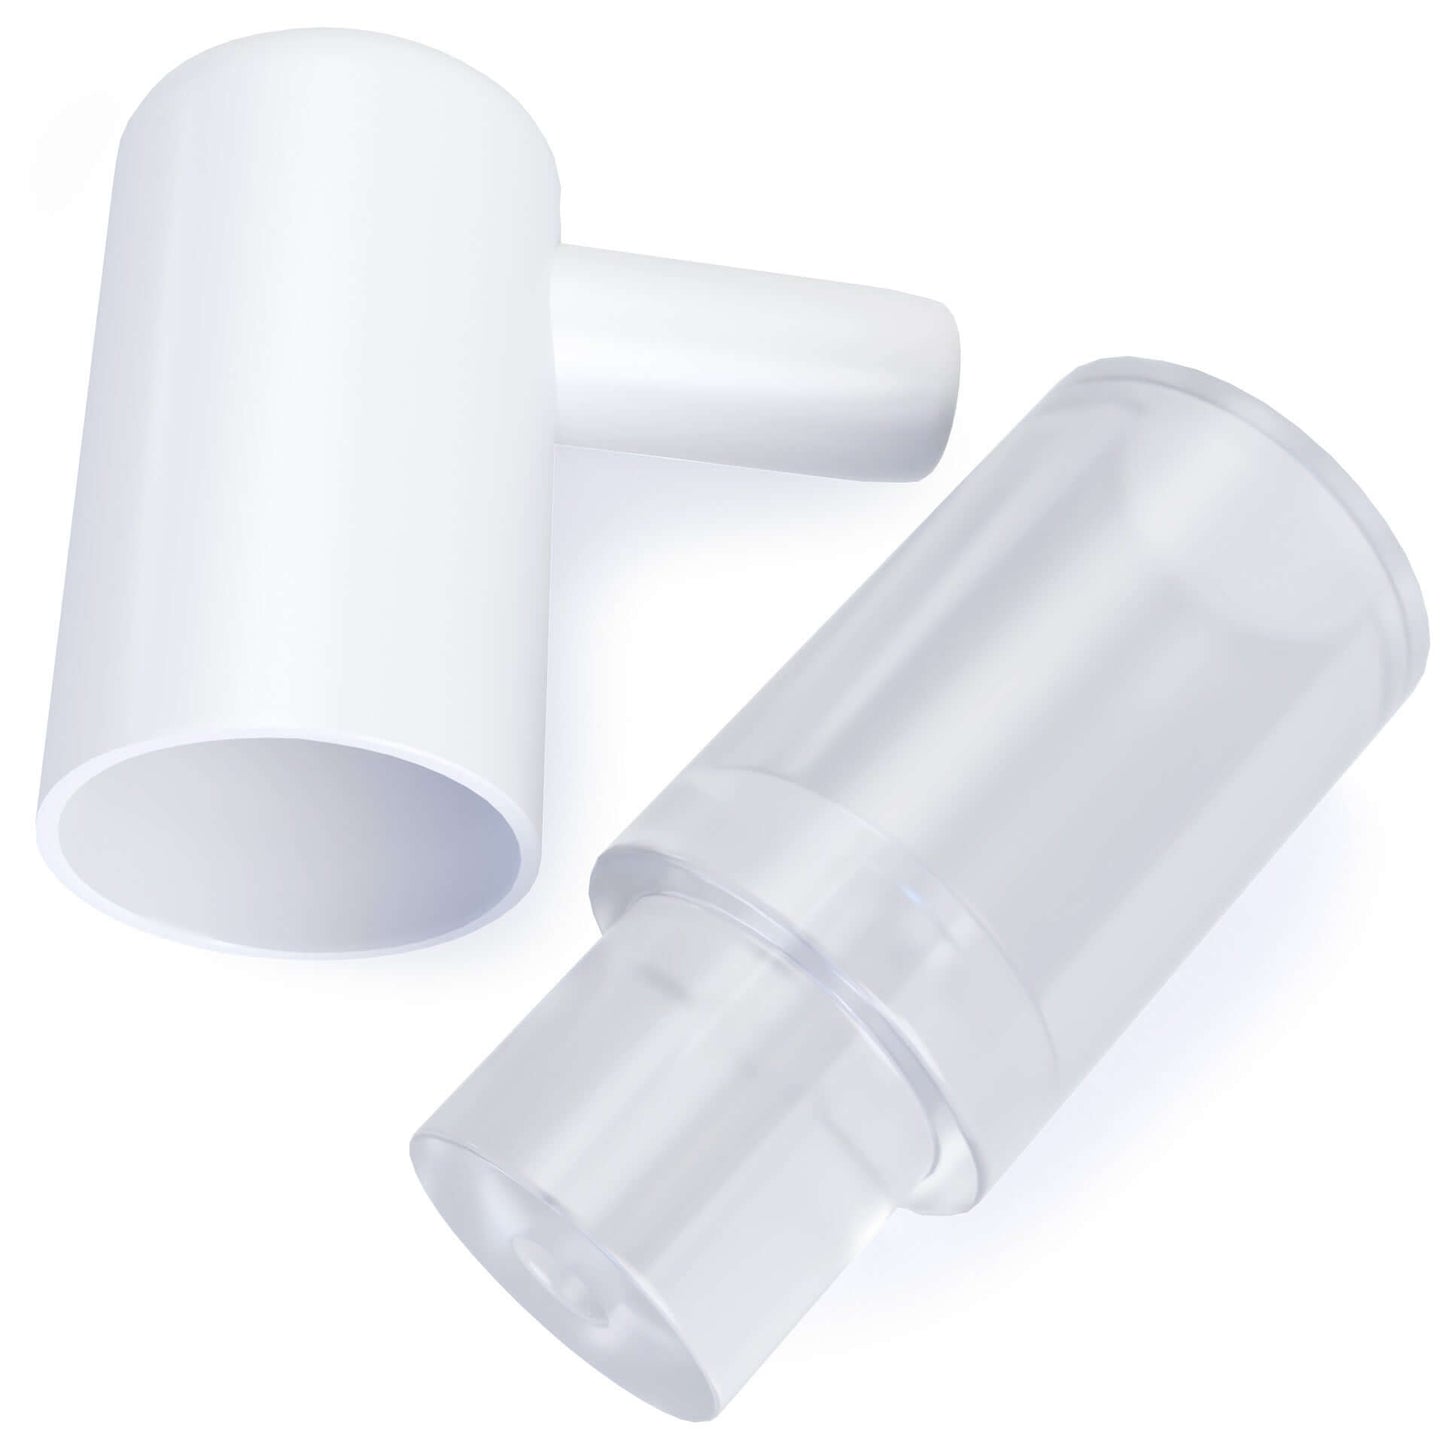 new version of collection cups tubing adaptors allows seamless integration with the Pump-A-Collect Collection Cup Set